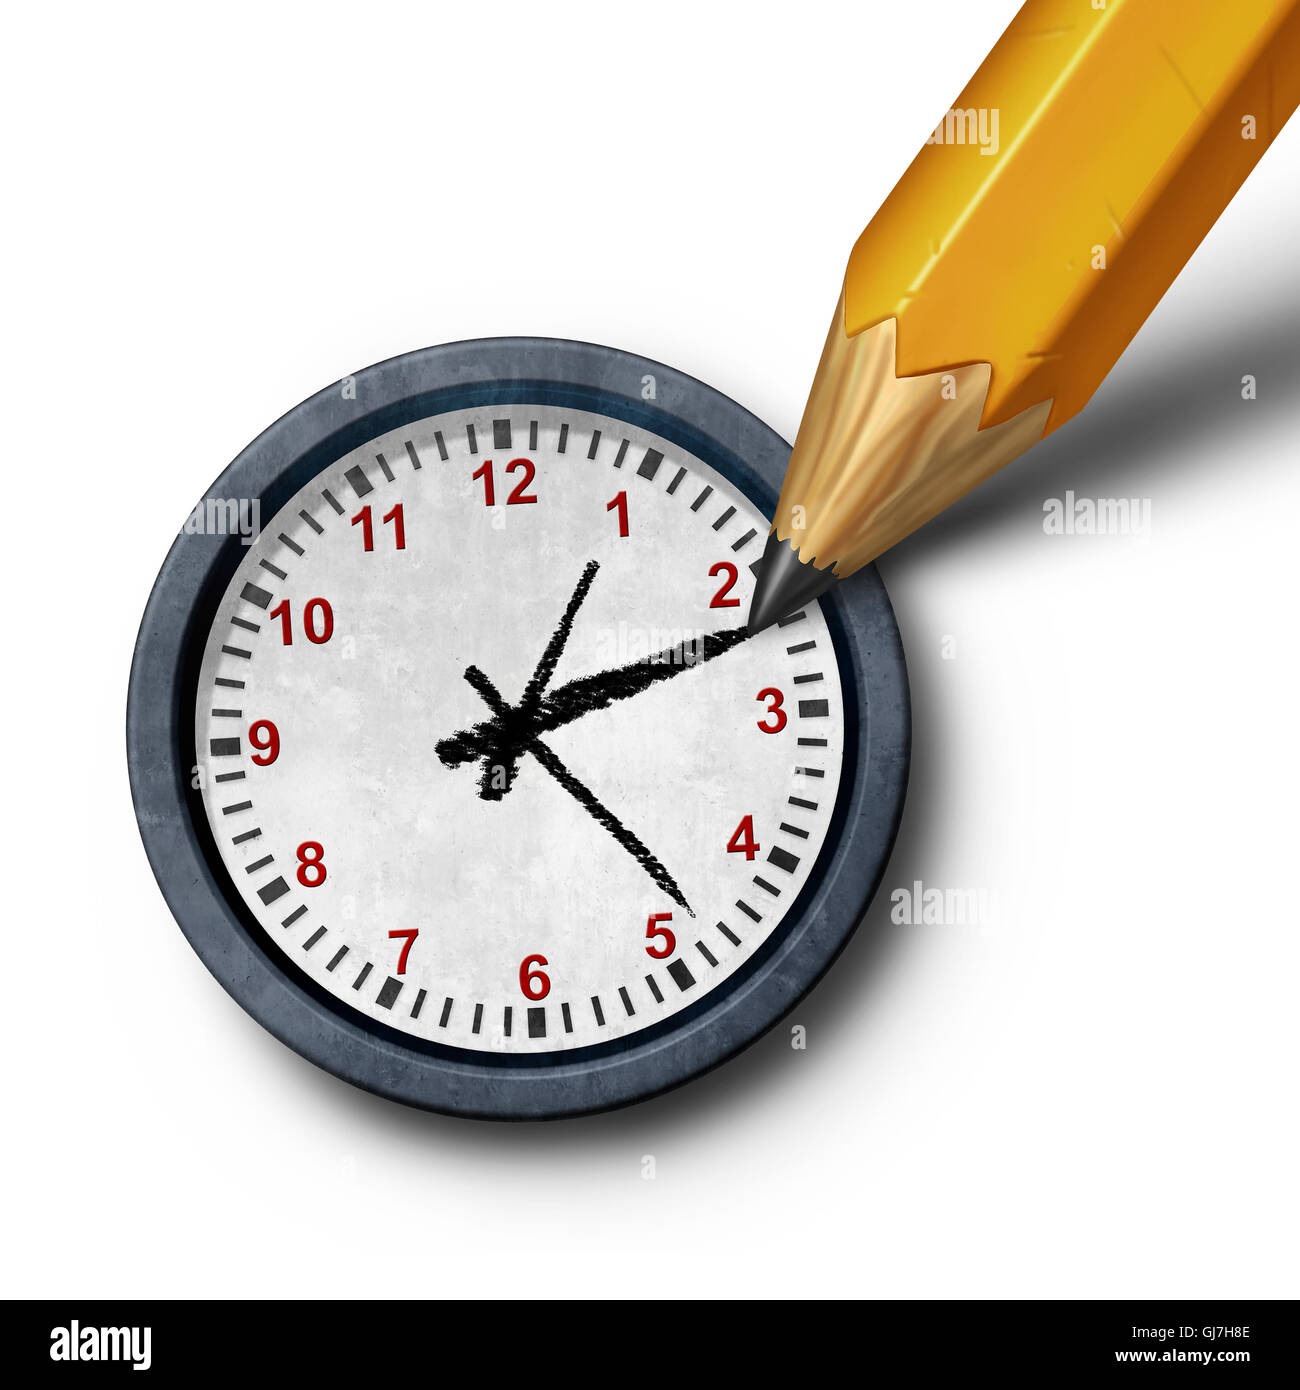 Planning time business management schedule concept as a pencil drawing the hour and minute hands on a clock as a control metaphor as a 3D illustration. Stock Photo